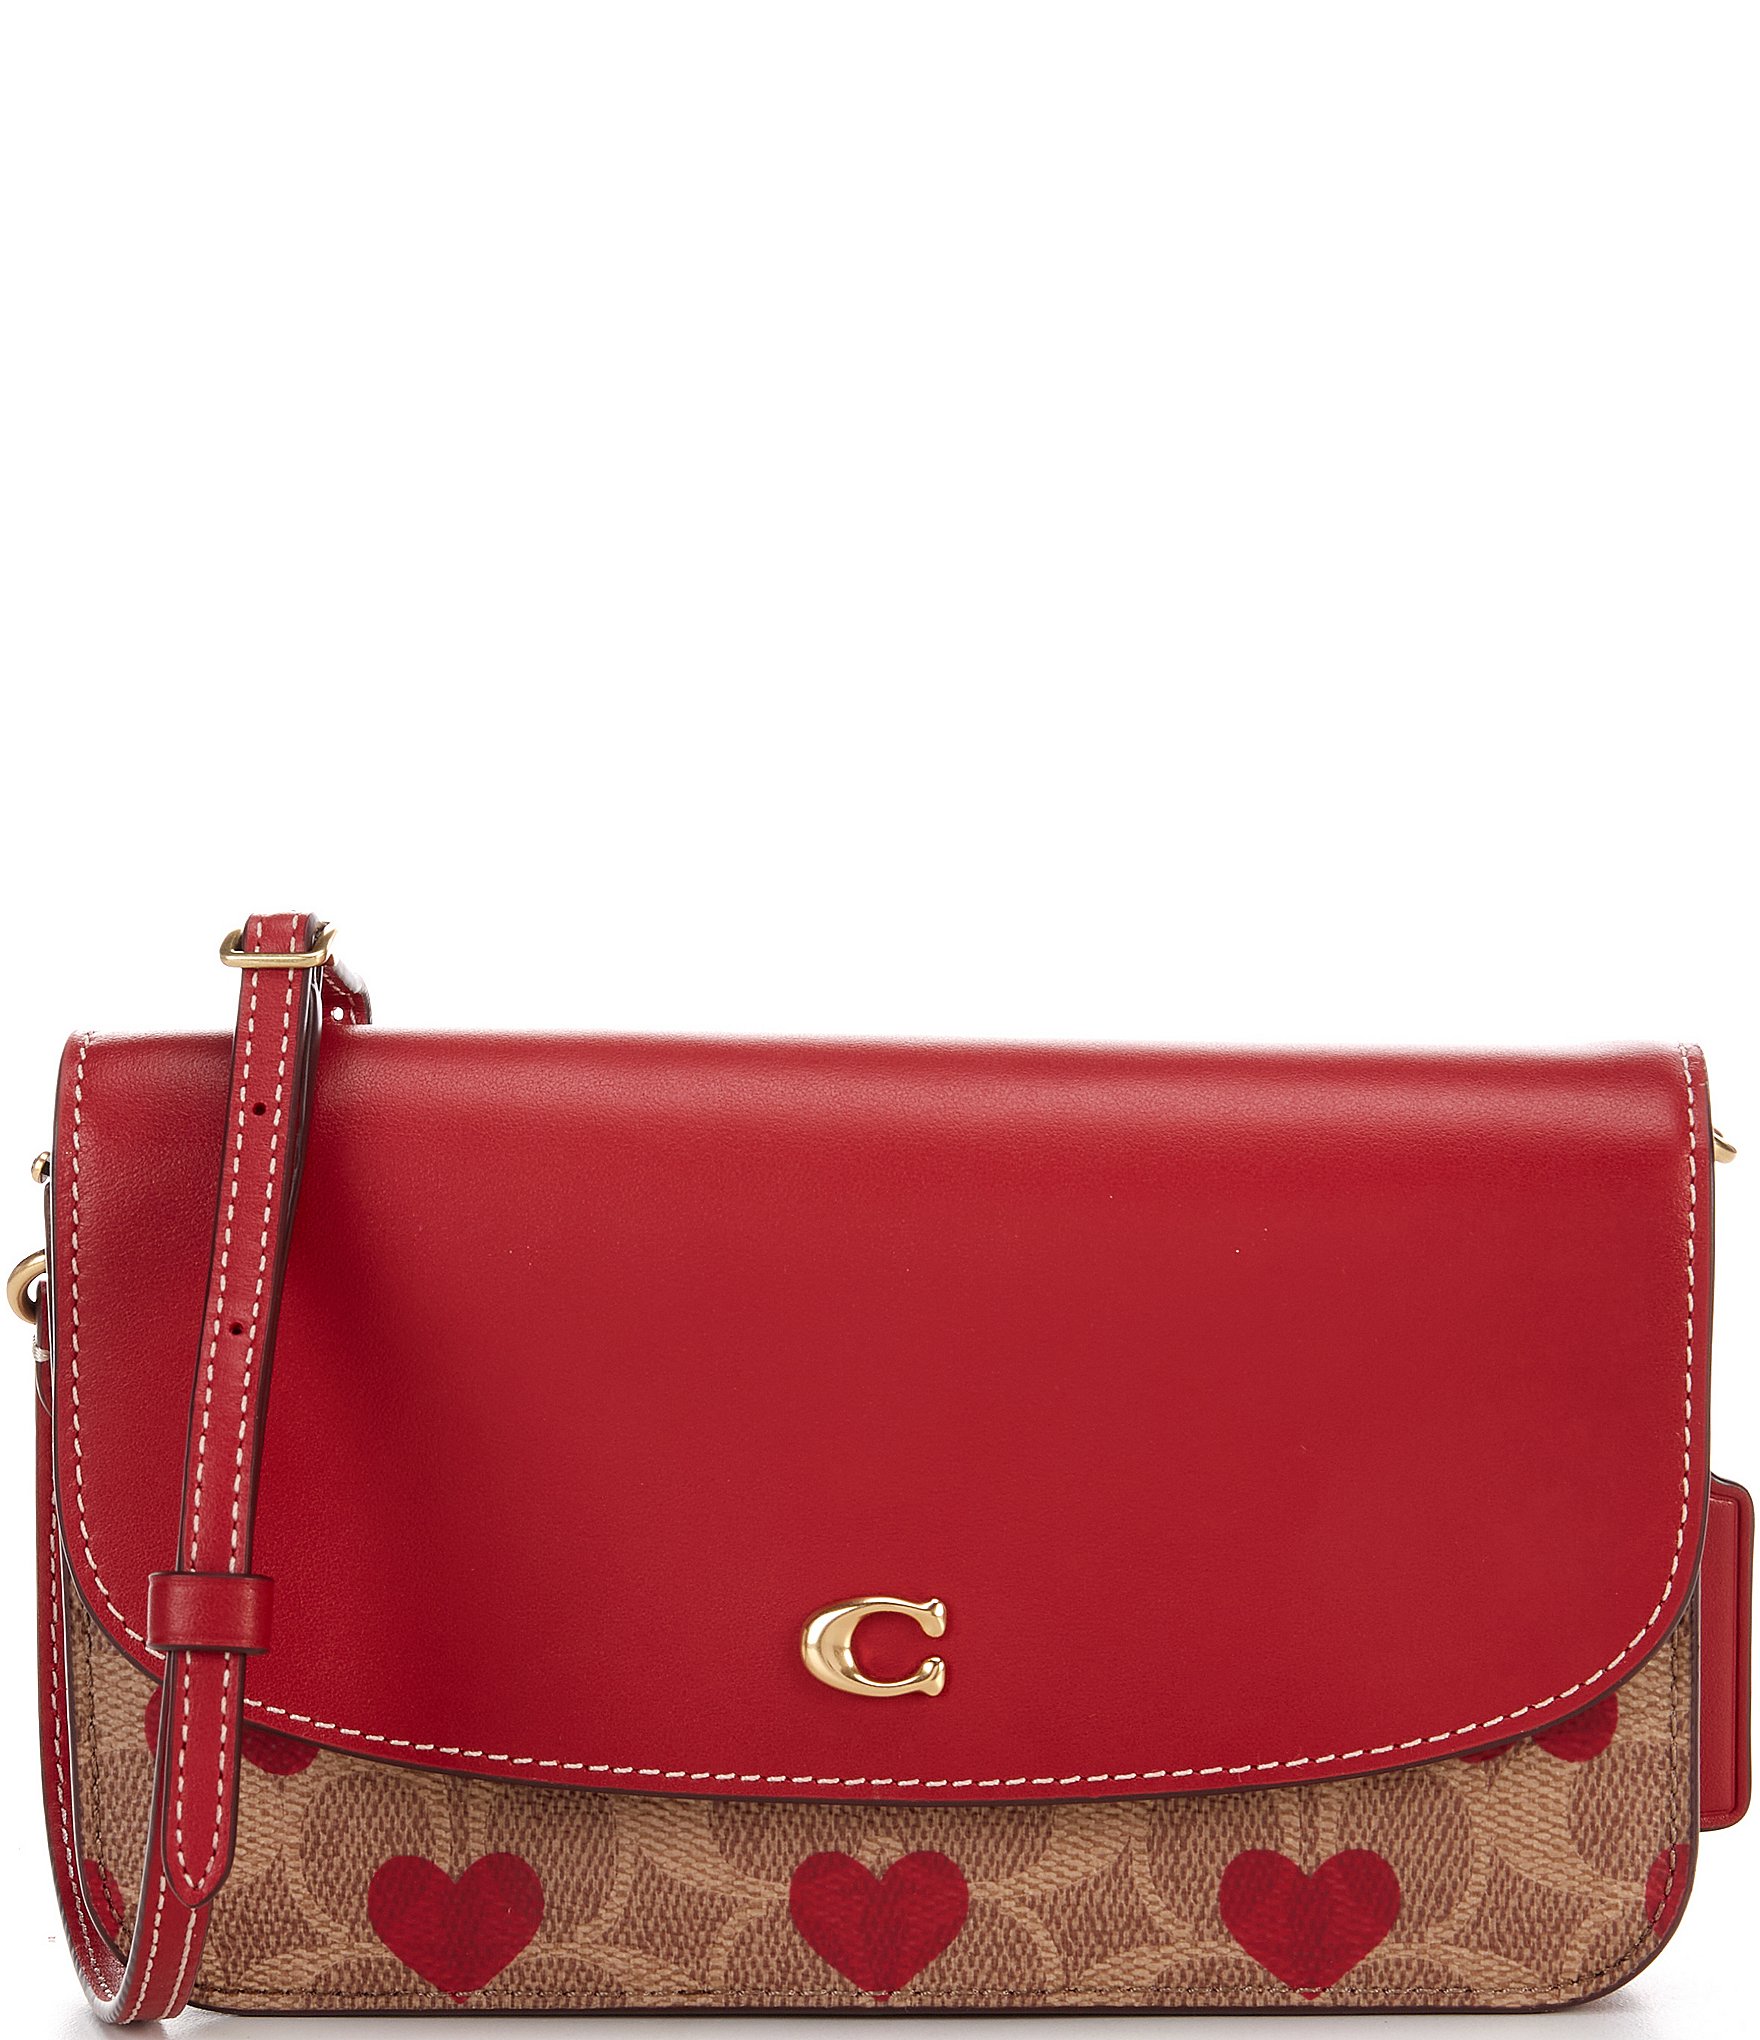 COACH Heart Zip Leather Chain Crossbody Bag in Red